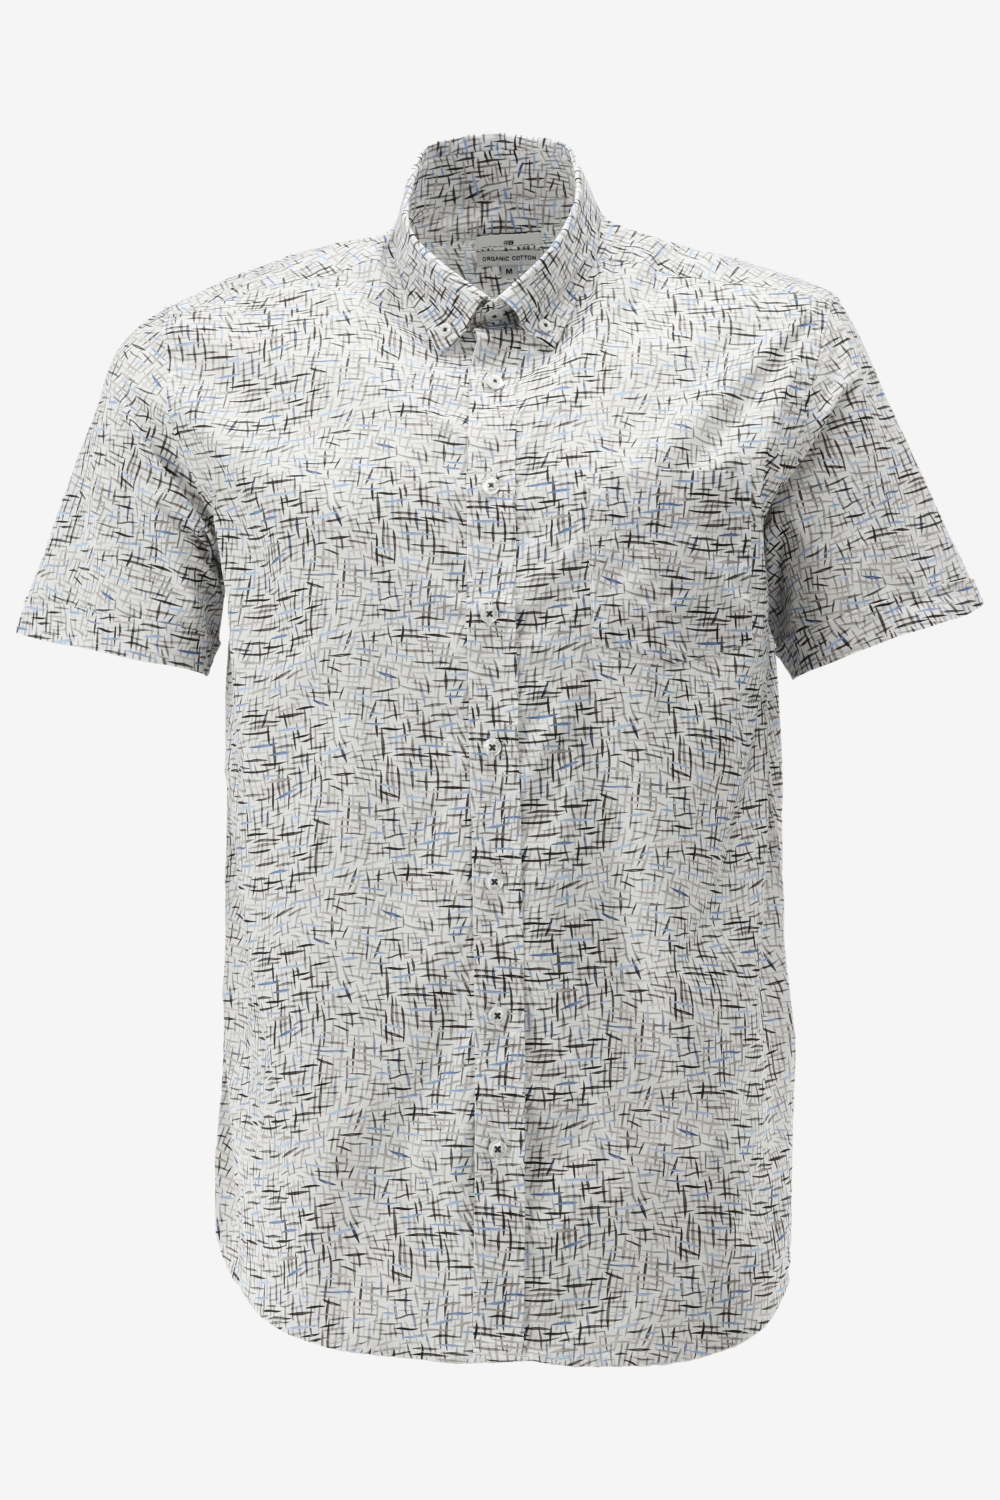 State of Art Casual Shirt